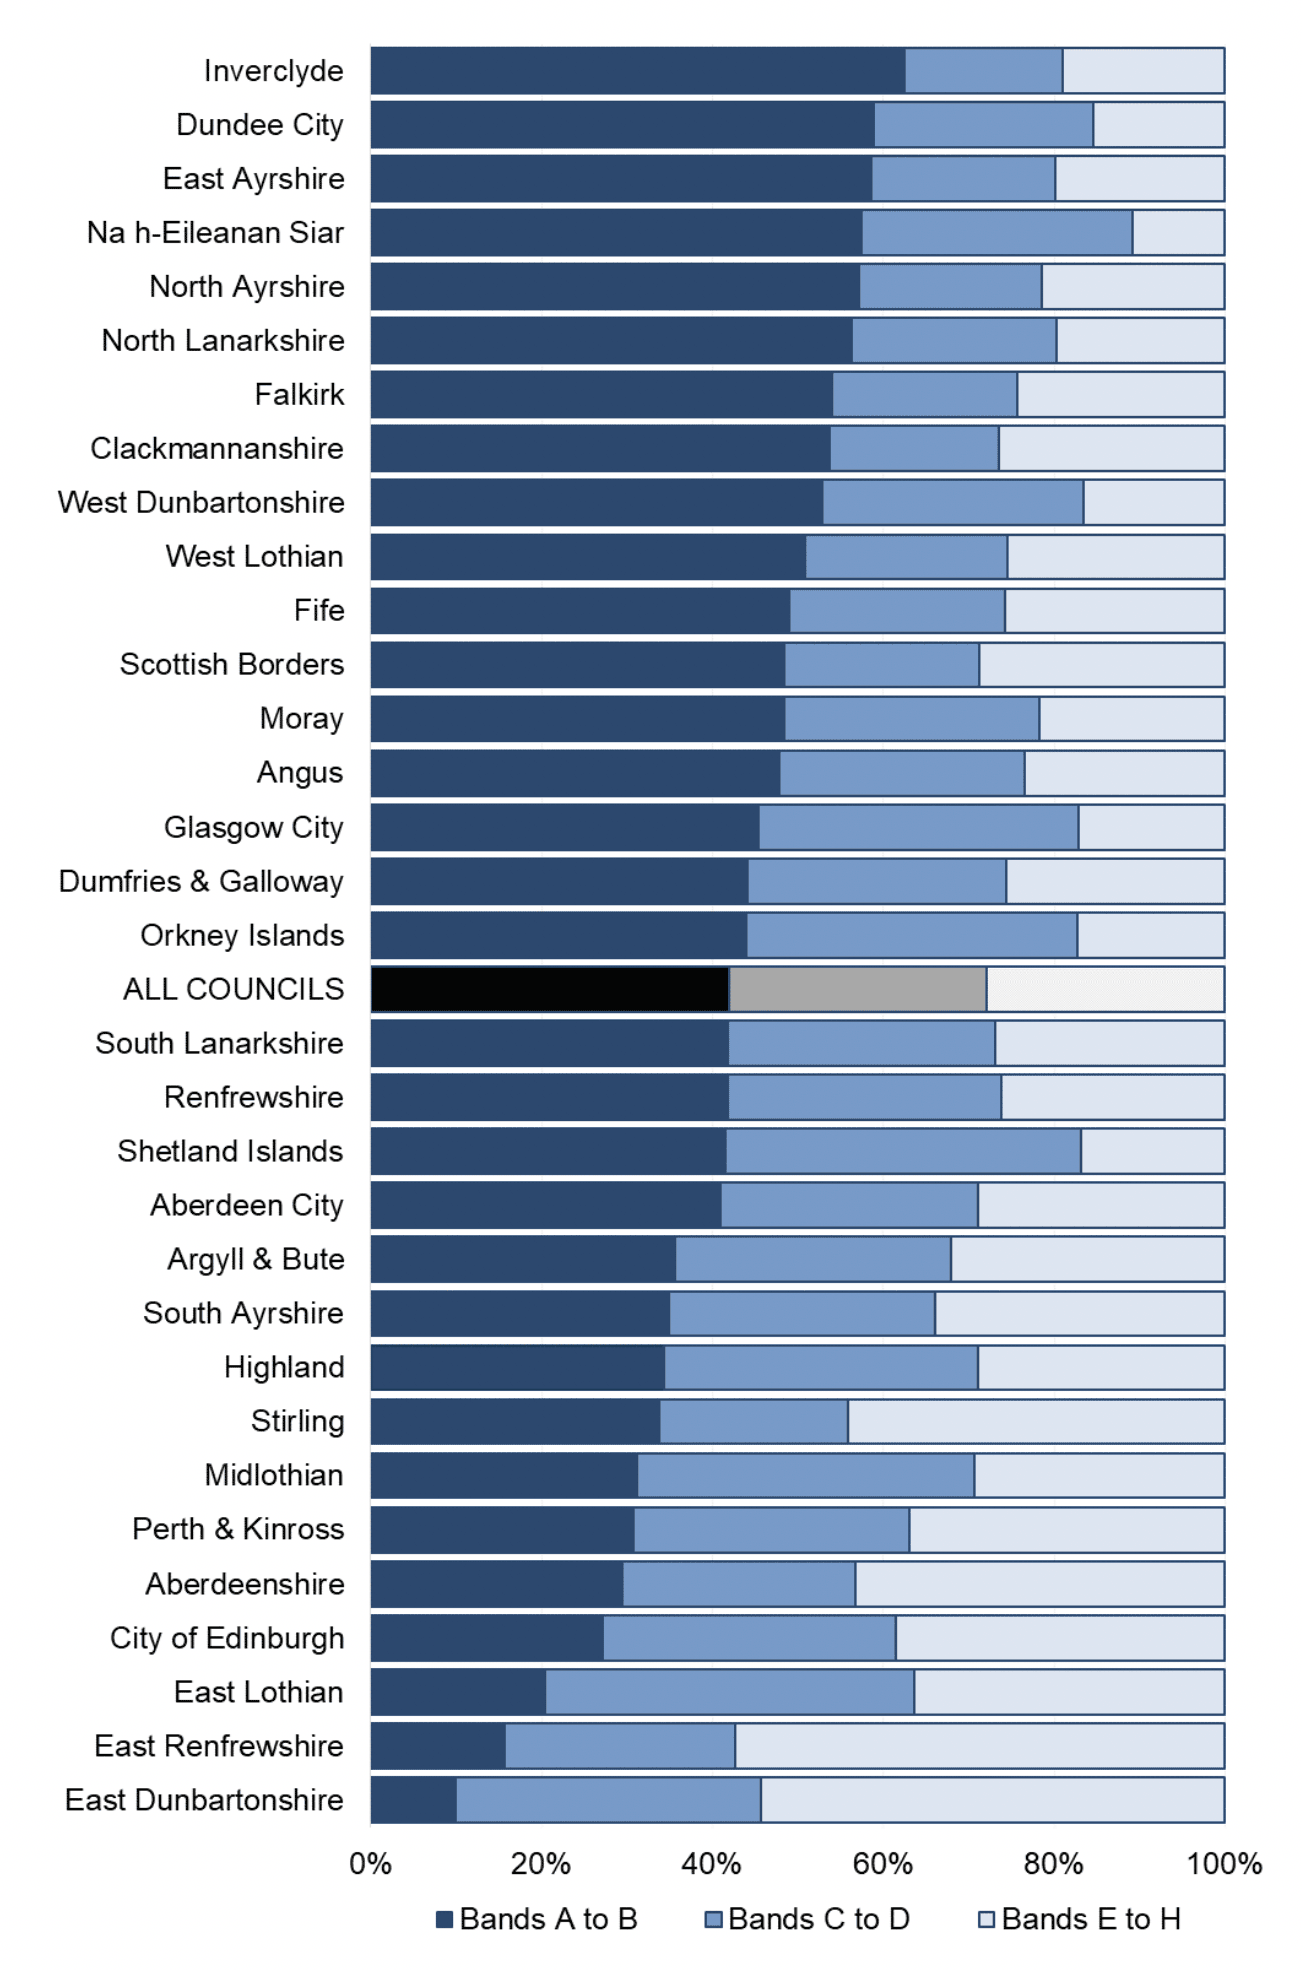 Bar chart showing the distribution of chargeable dwellings across Council Tax bands in each local authority. Across Scotland, just under three-quarters of all chargeable dwellings are in Bands A to D. The distribution varies across local authorities due to variations in property market values. Na h-Eileanan Siar has the largest proportion of dwellings in Bands A to D at 89 per cent, whereas East Renfrewshire has the lowest proportion in Bands A to D at 43 per cent.